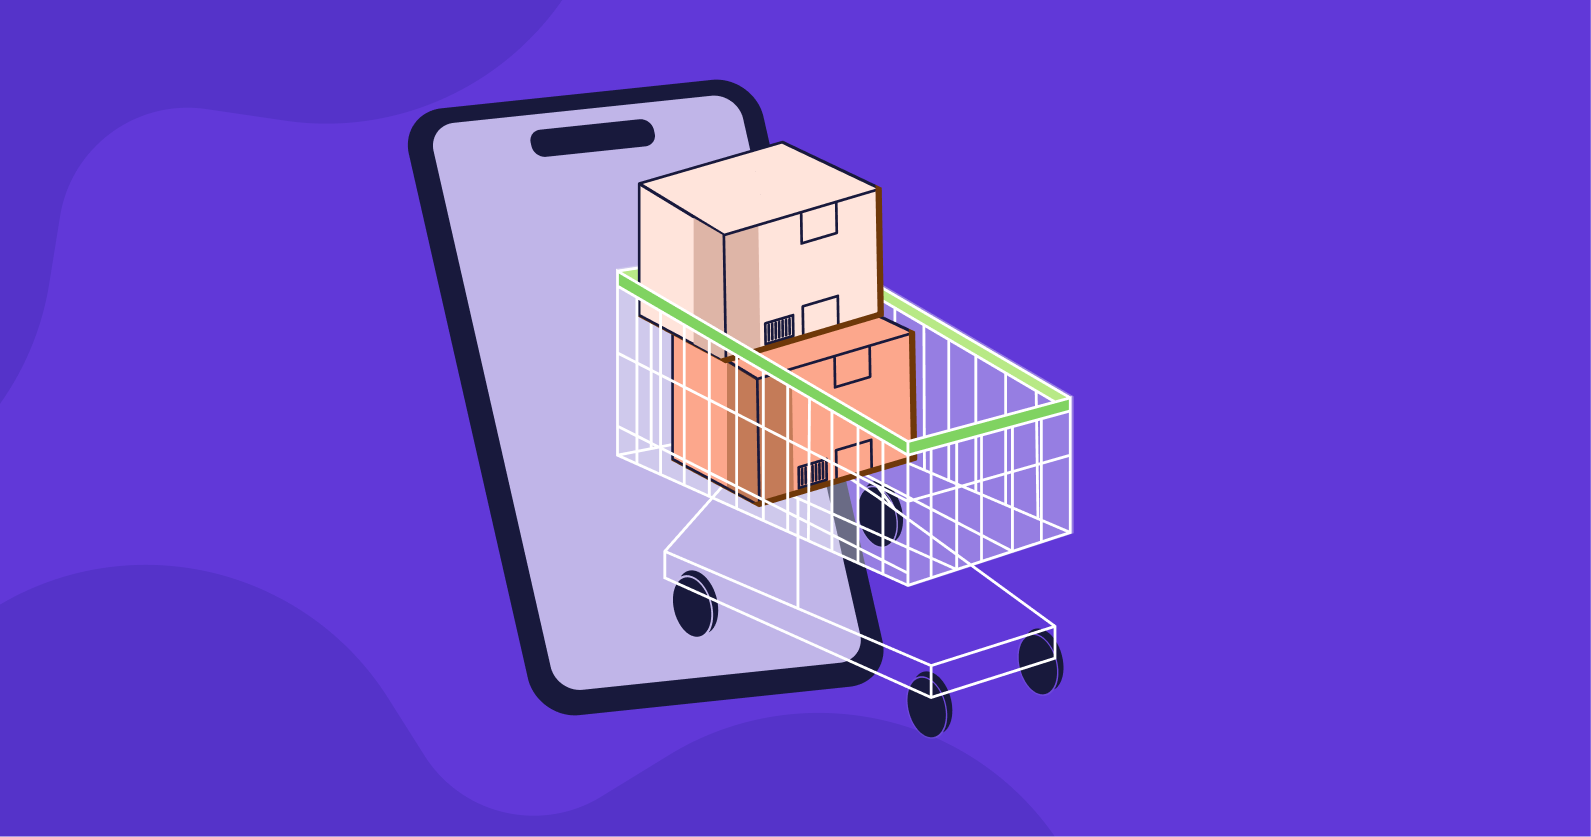 Illustration of a shopping trolly with packages in it and a mobile phone behind it.